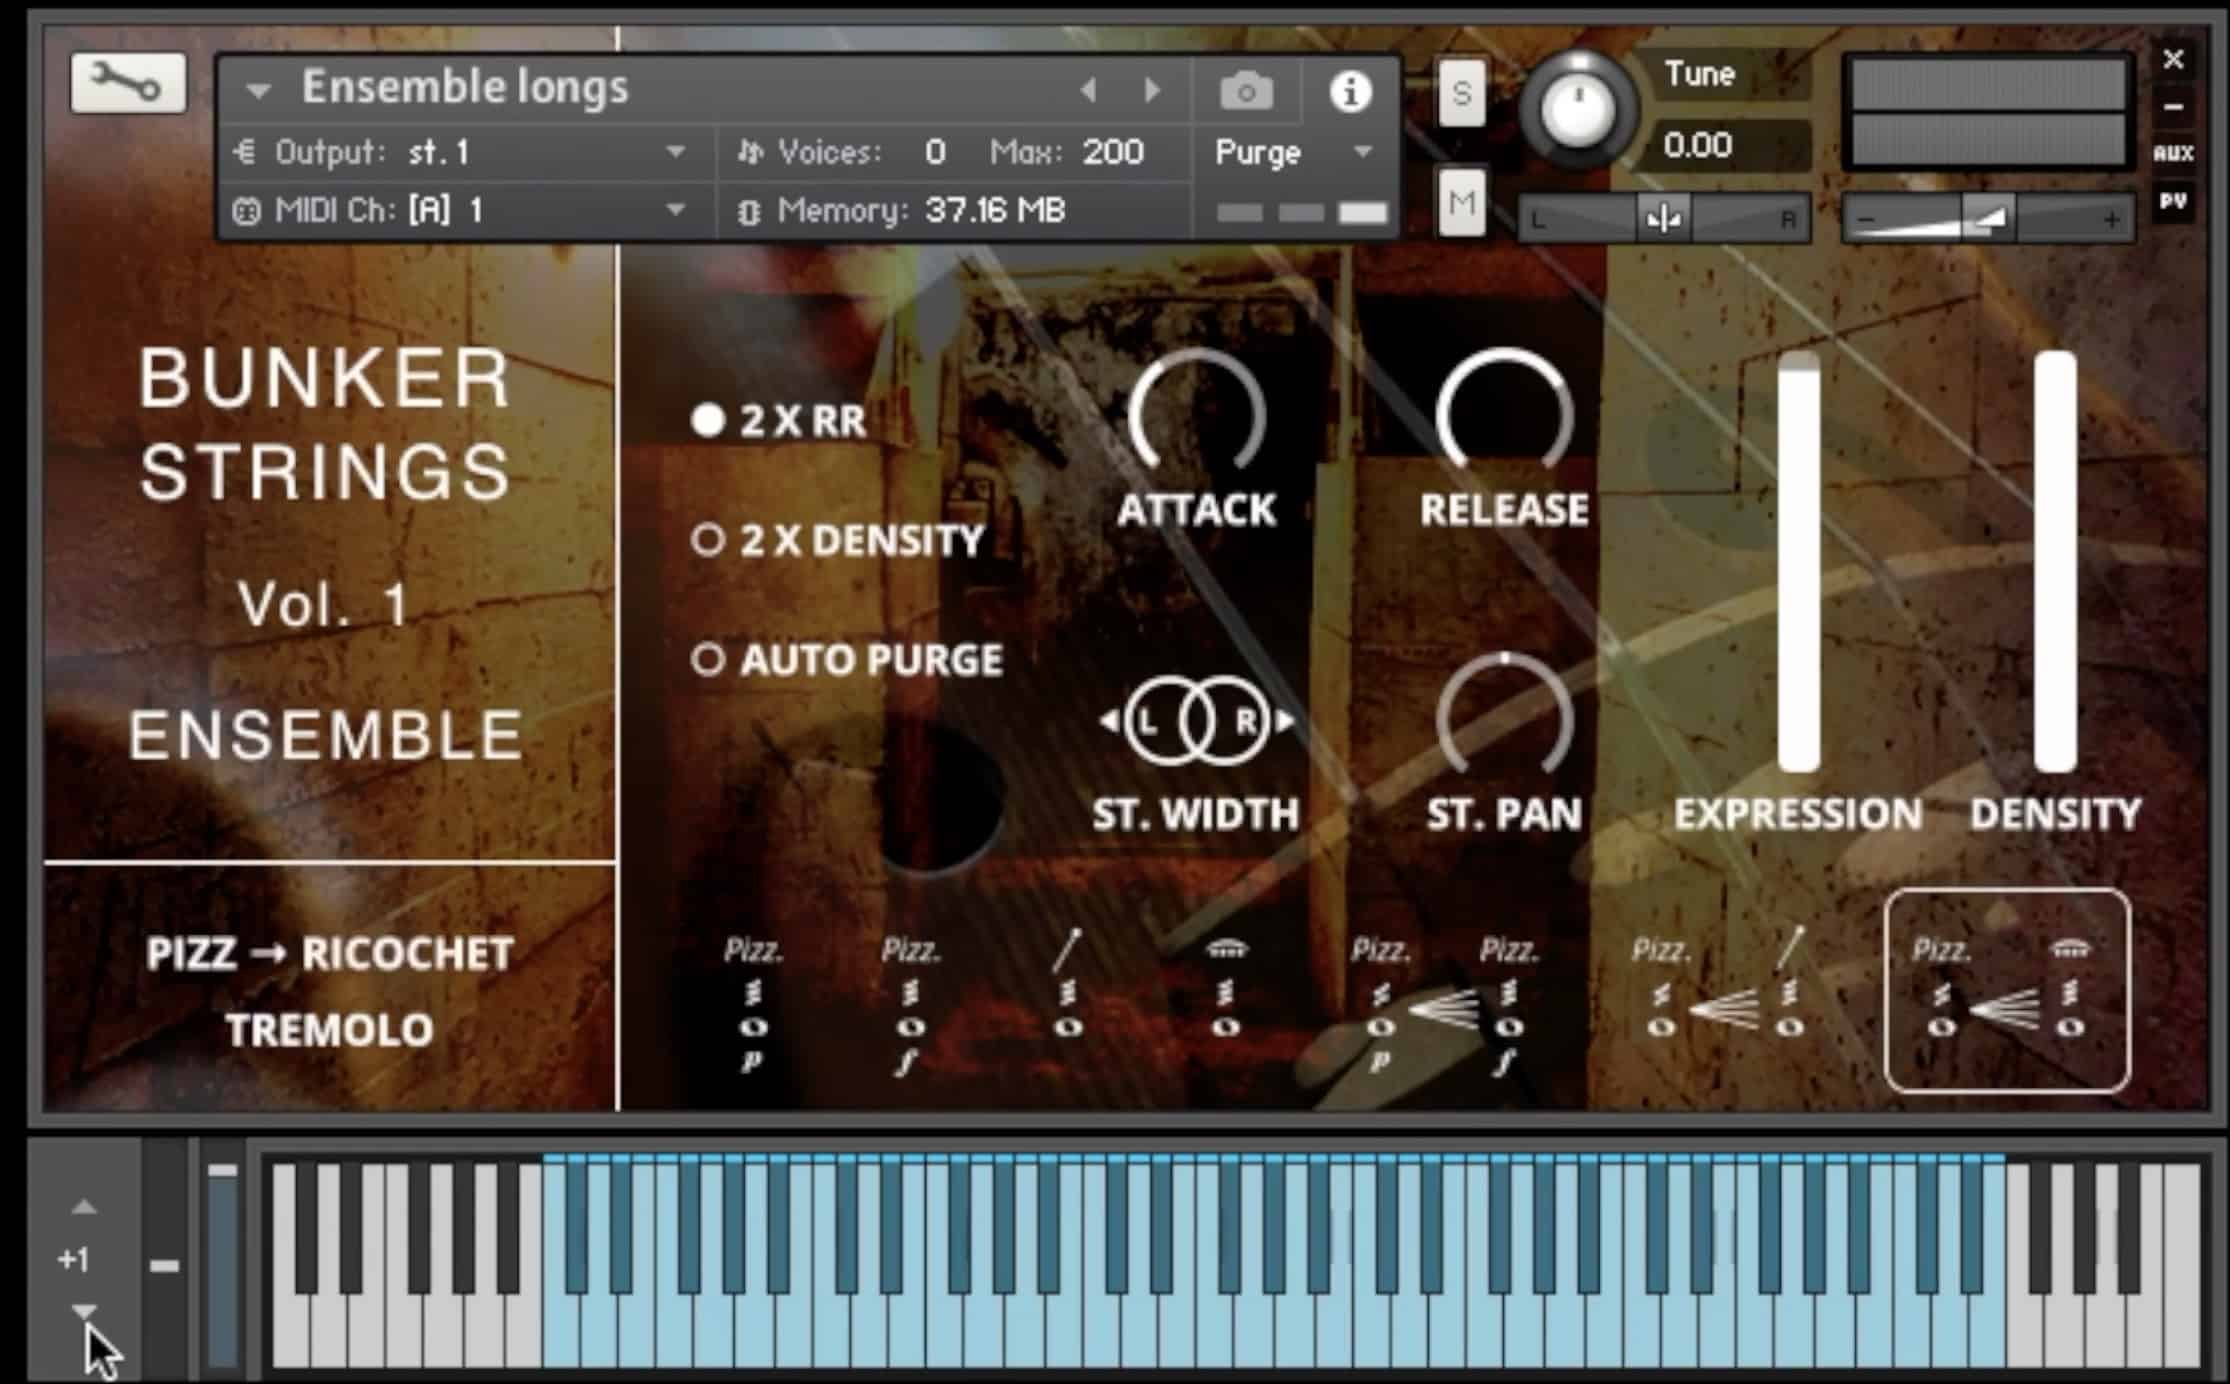 Bunker Strings Updated to Version 2